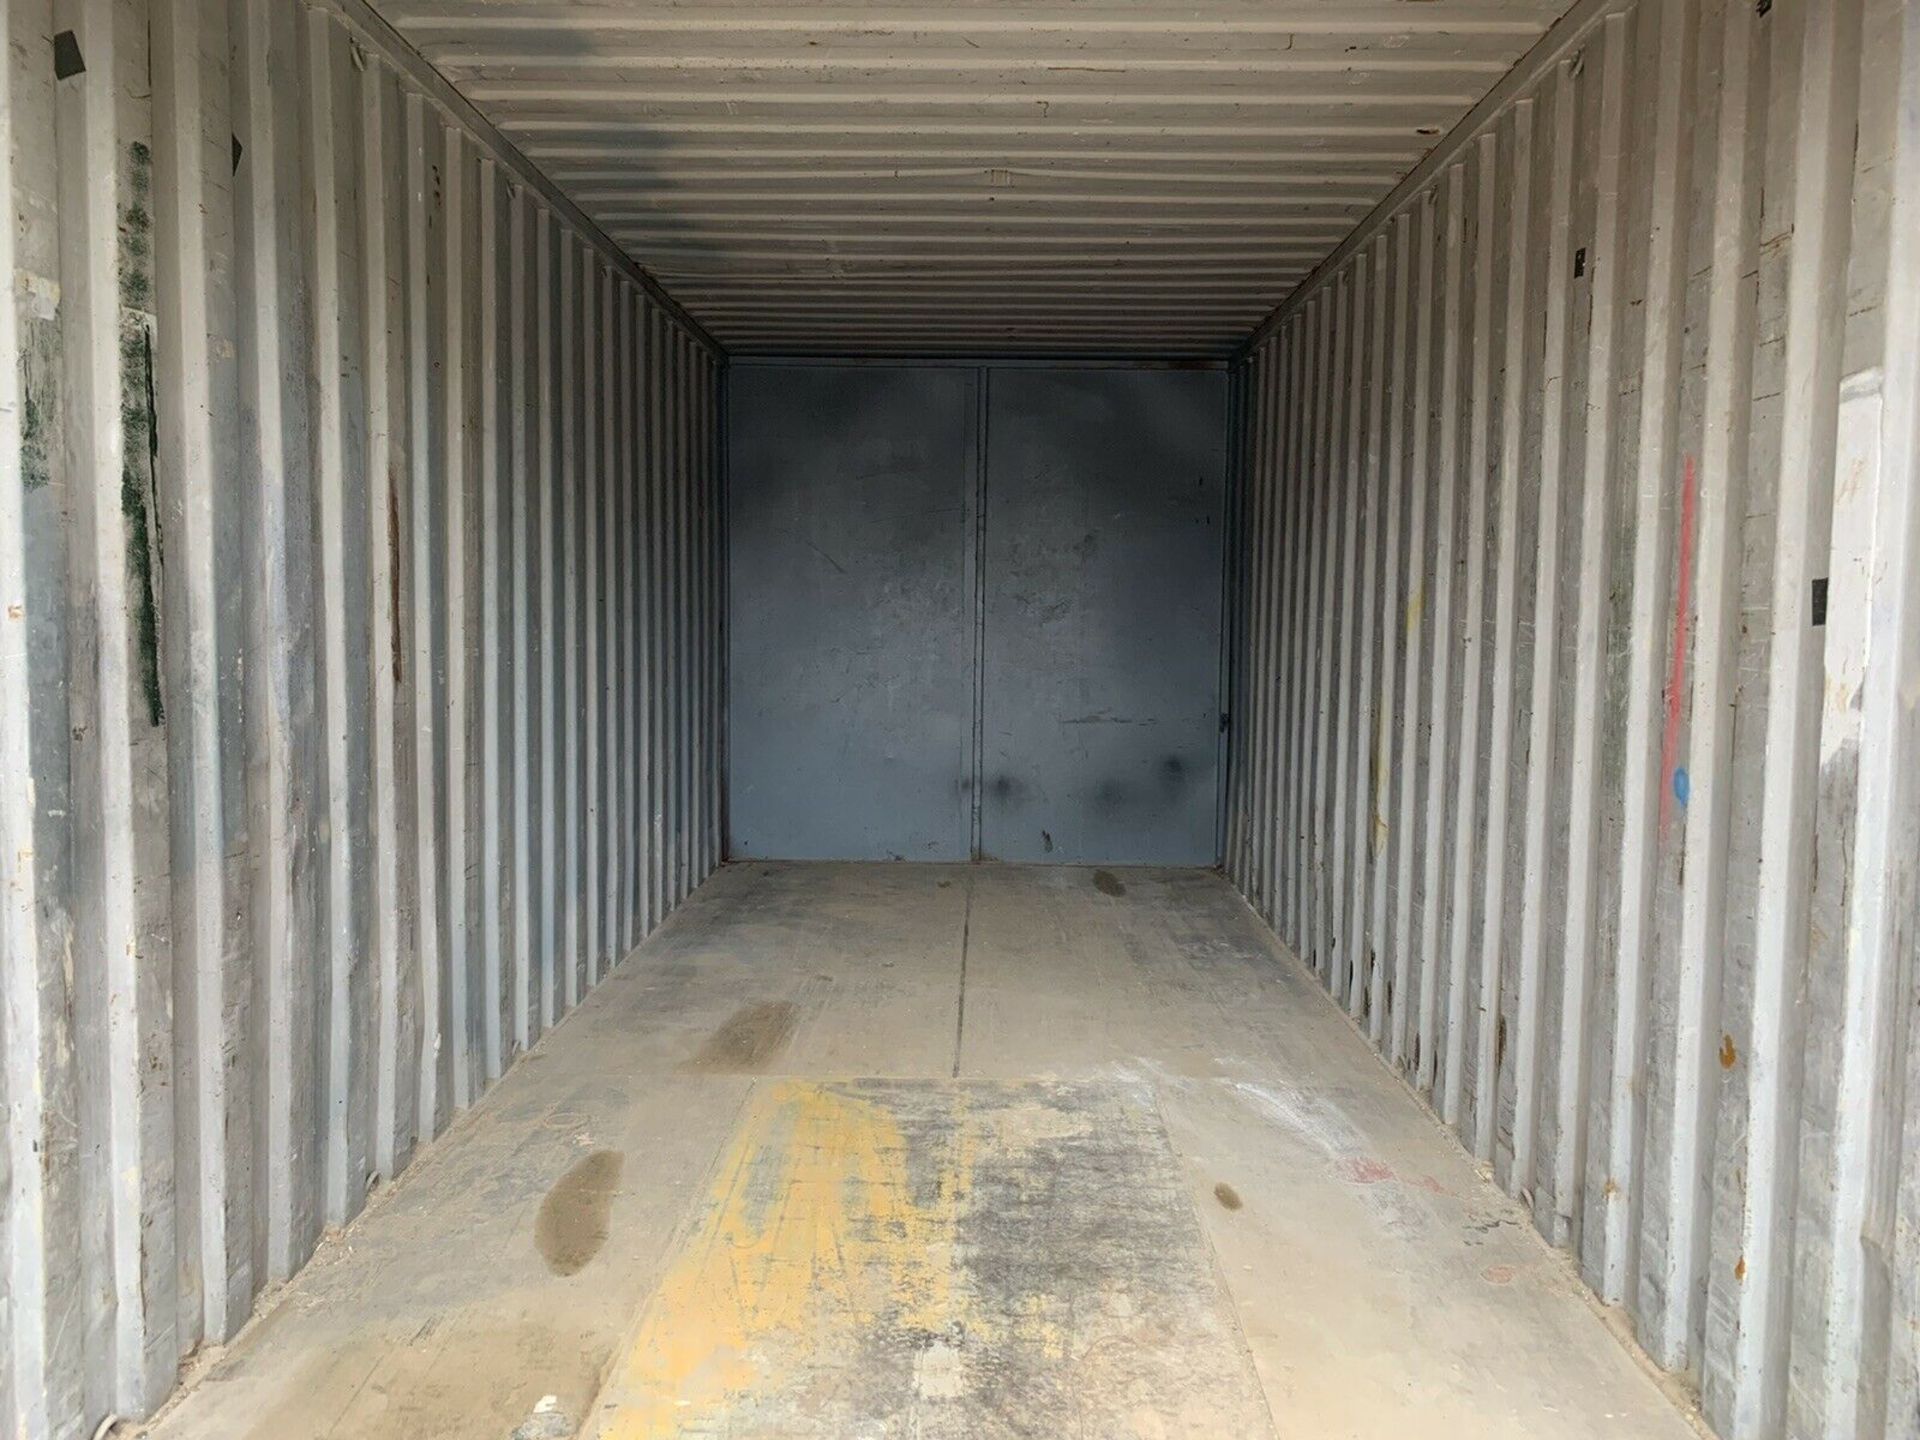 20ft Portable Storage Container Shipping Container - Image 3 of 6